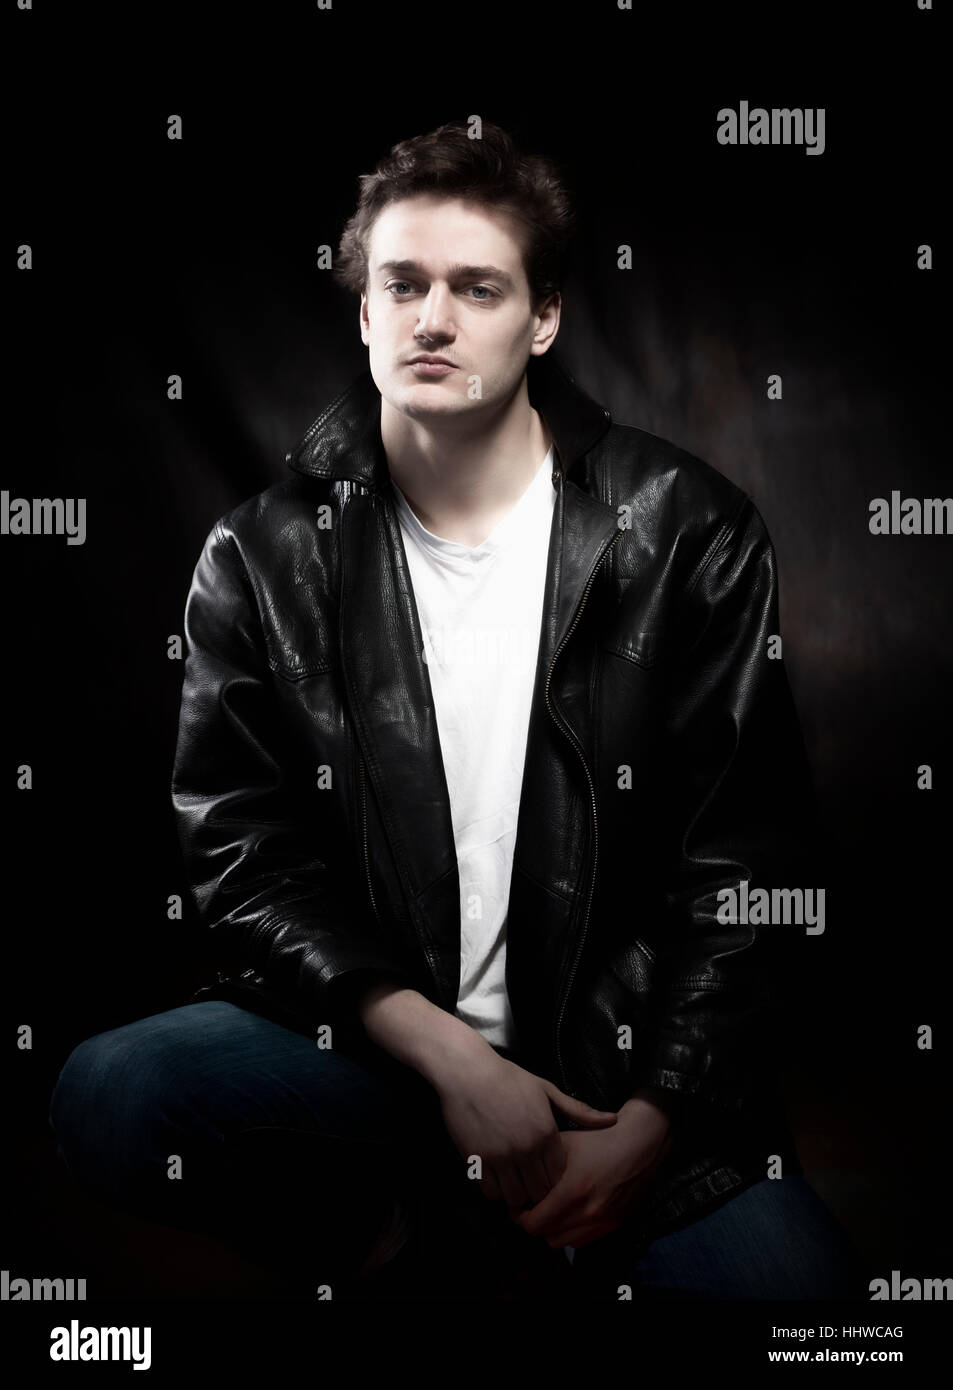 Portrait of a Young Man in Leather Jacket. Stock Photo